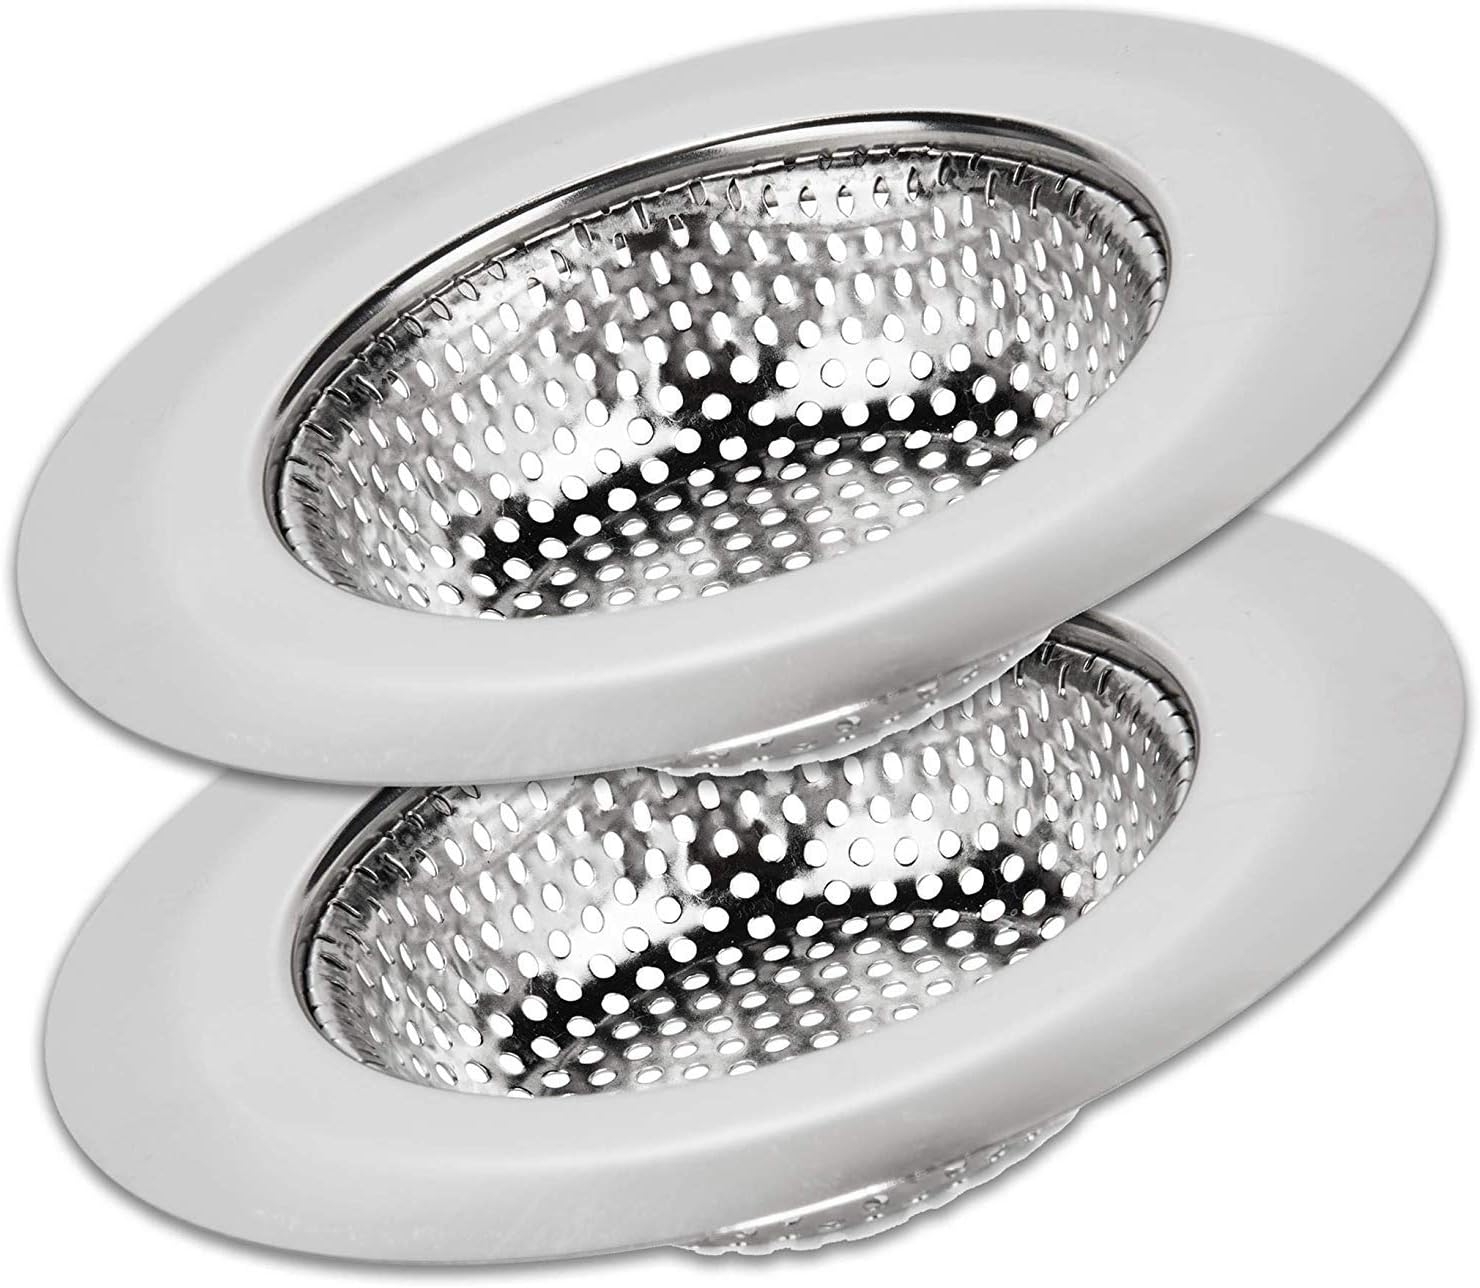 SoLID (TM) Kitchen Sink Strainer Basket Catcher 2 pack 4.5 inch Diameter, Wide Rim Perfect for Most Sink Drains, Anti-Clogging Micro Perforation Holes, Rust Free, Dishwasher Safe